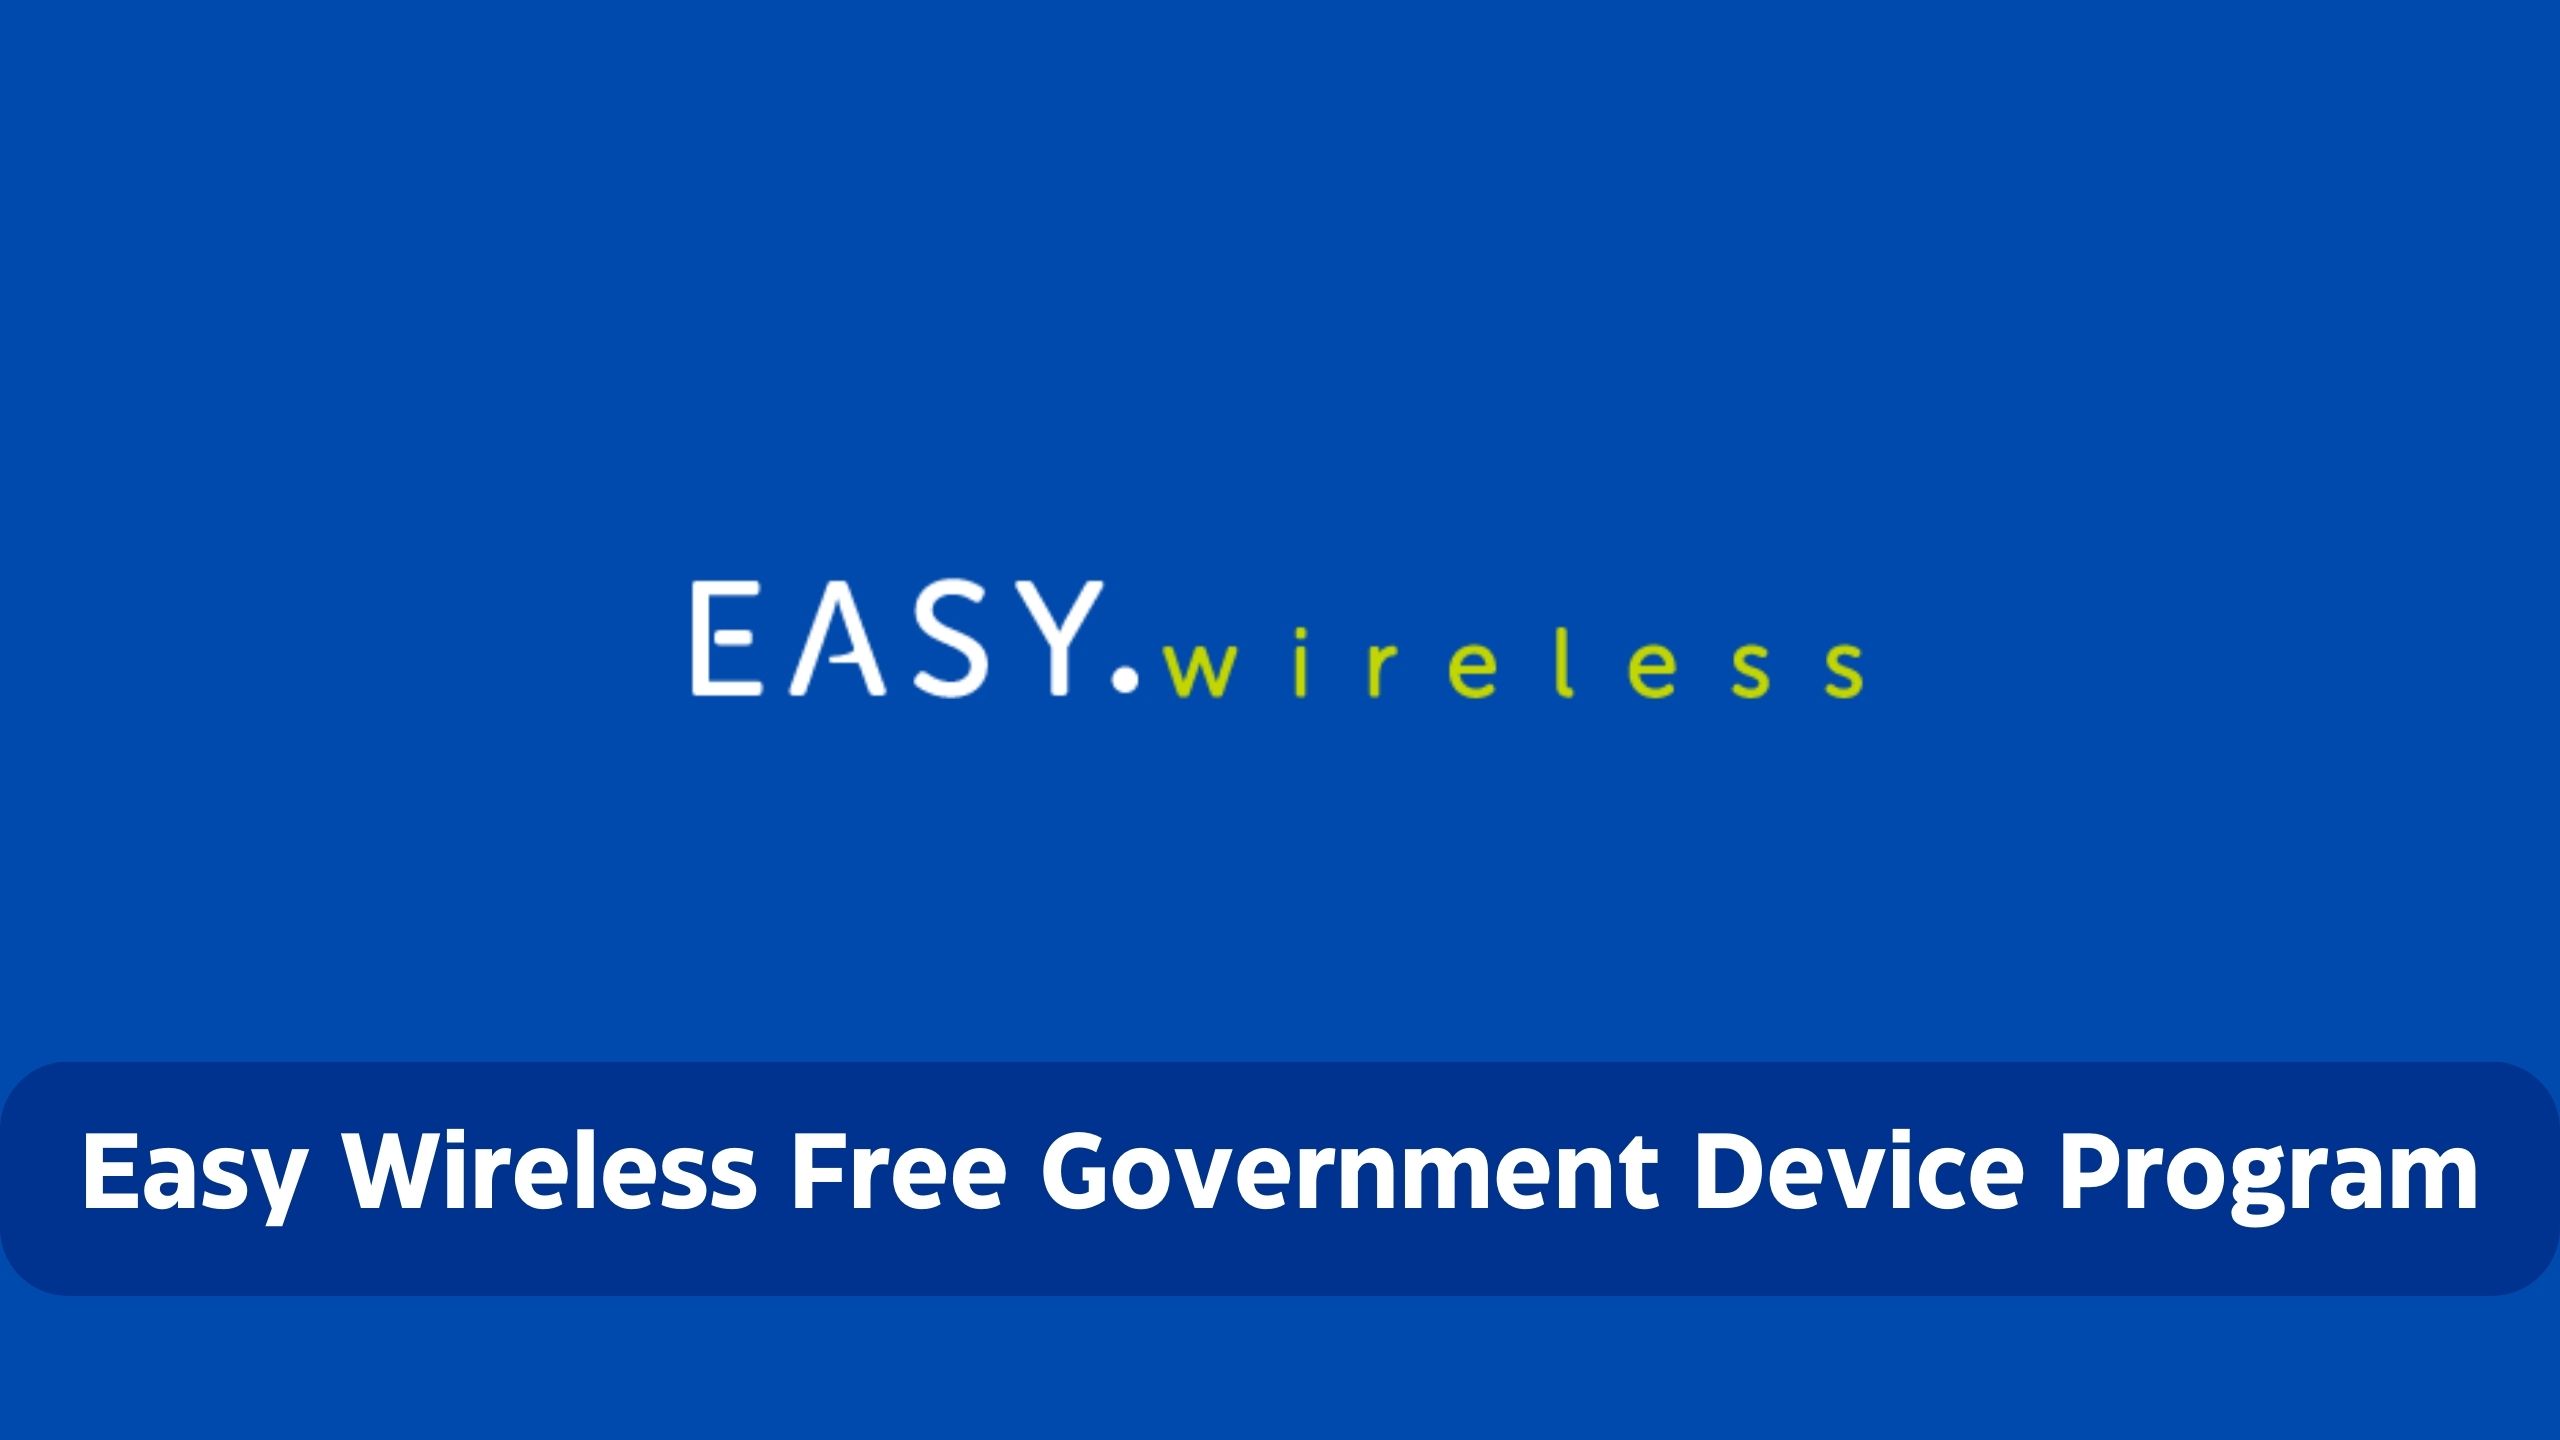 Easy Wireless Free Government Phone and Tablet Program, Lifeline & ACP Eligibility, Application, Status Check